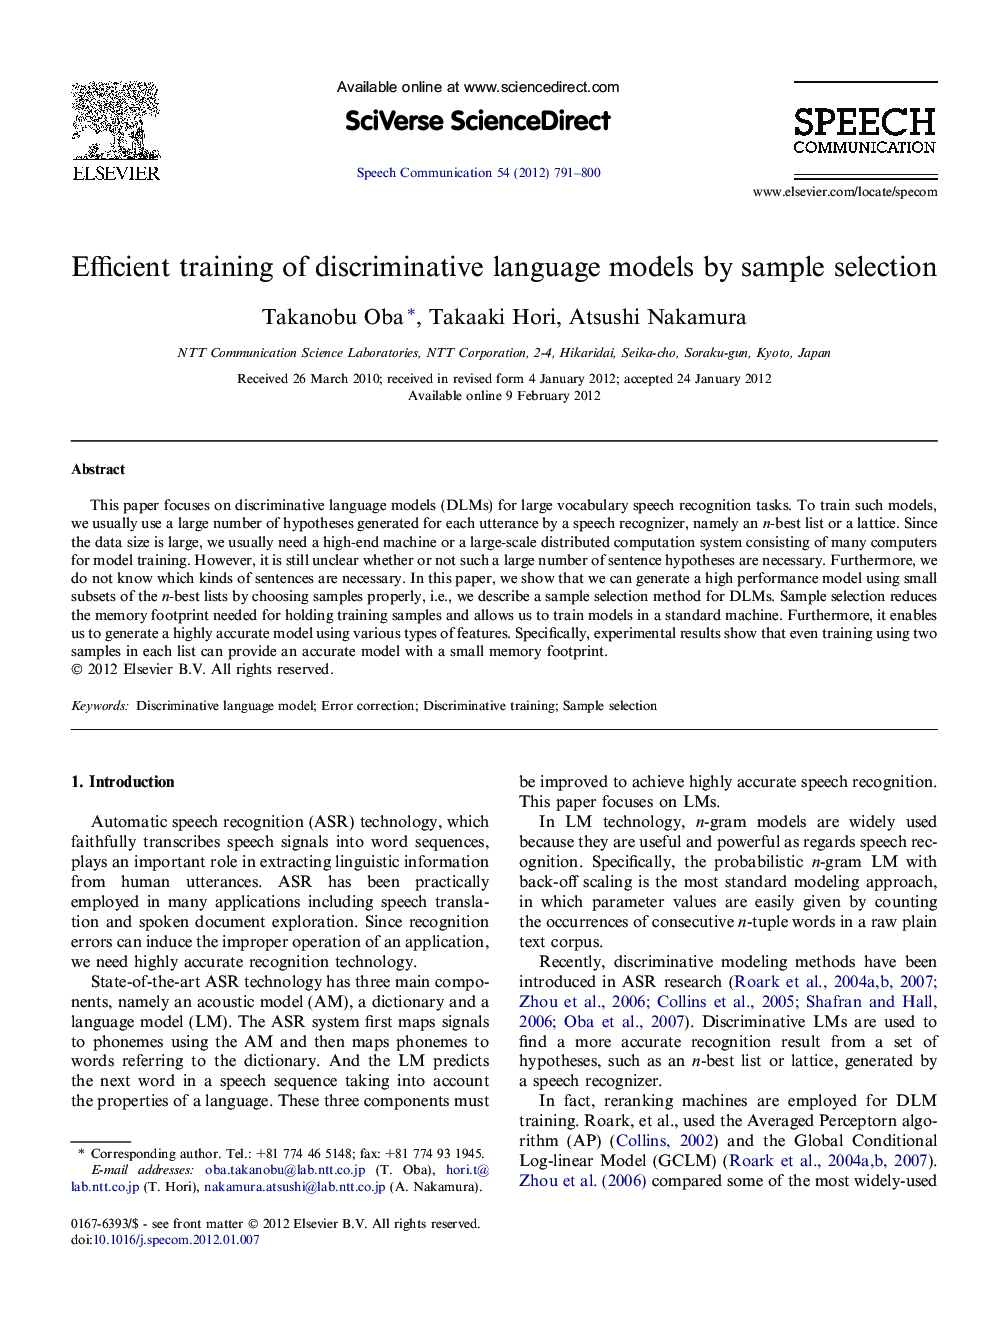 Efficient training of discriminative language models by sample selection